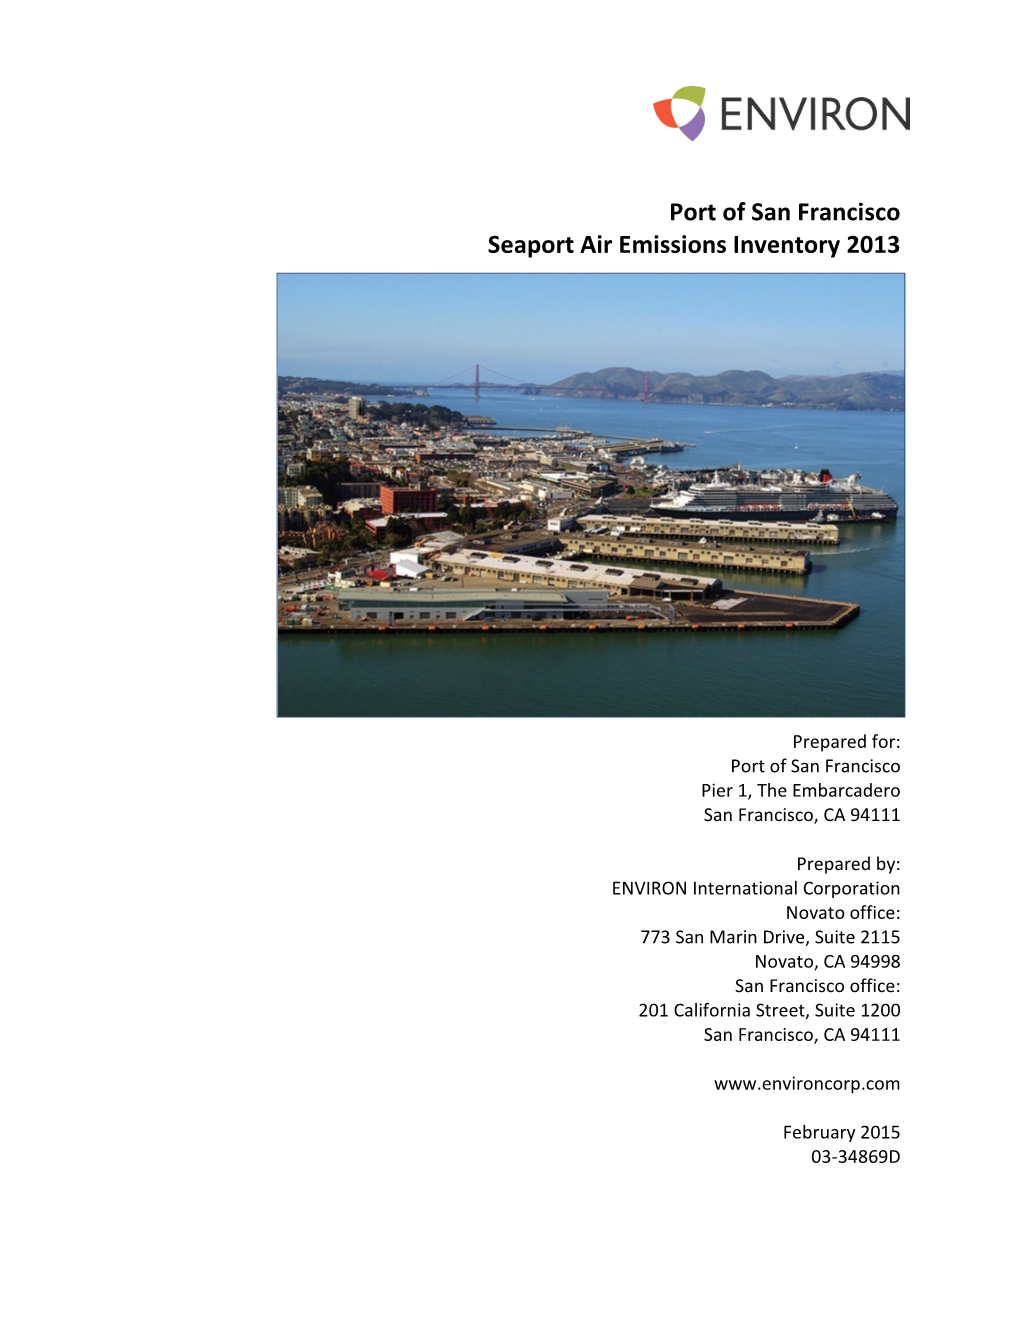 Port of San Francisco Seaport Air Emissions Inventory 2013